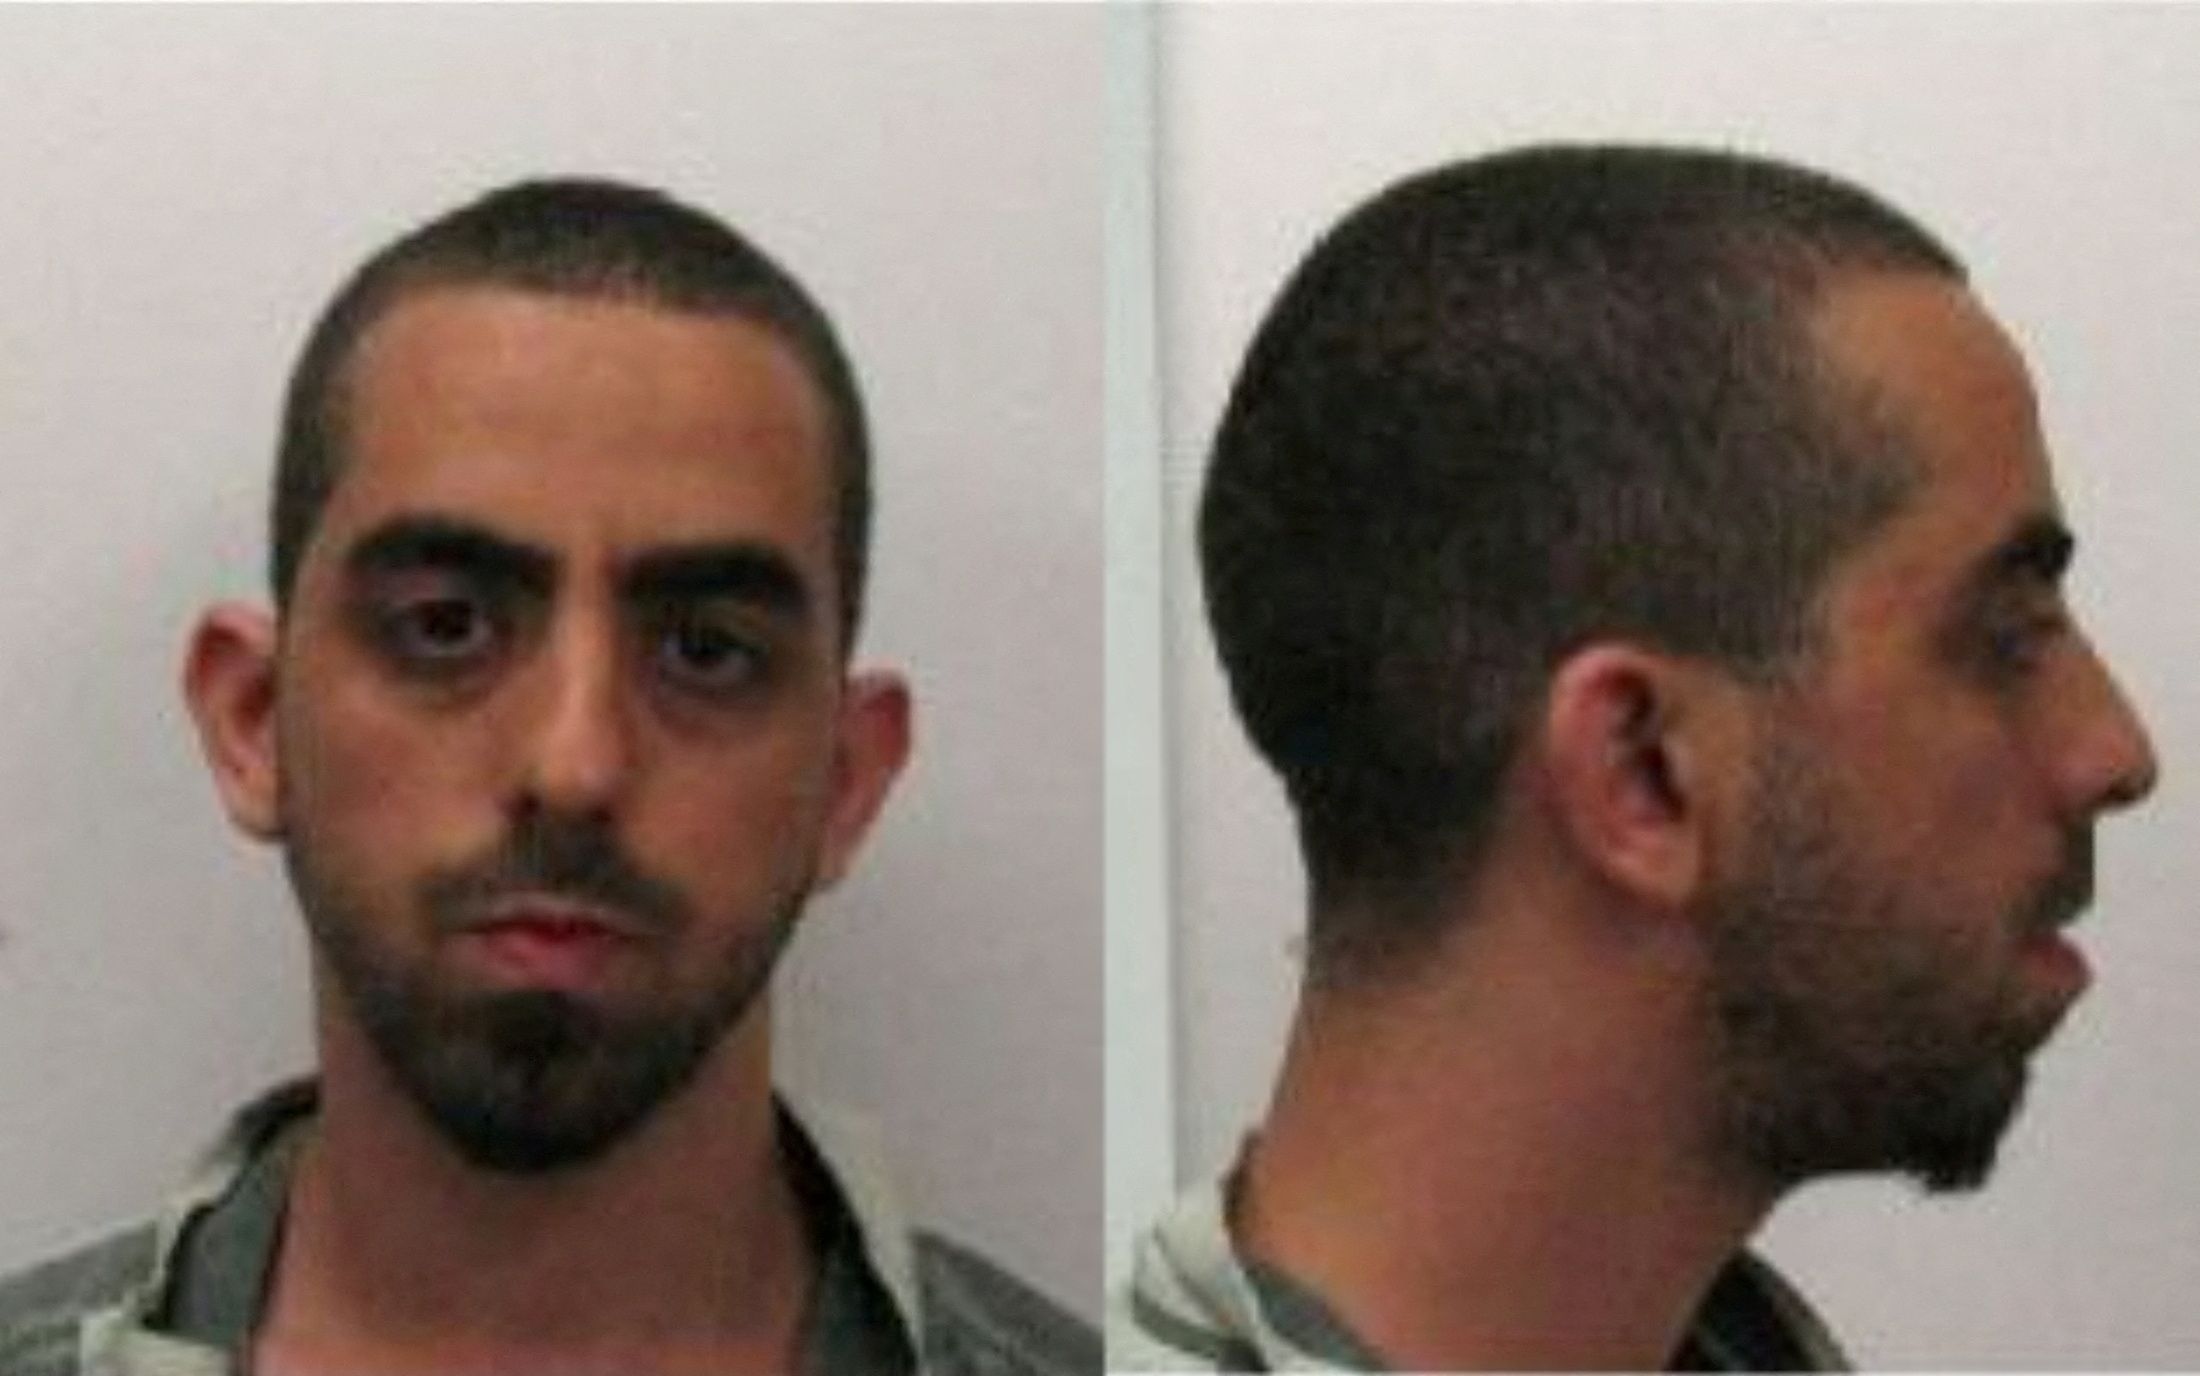 Hadi Matar of Fairview, charged with attempted murder for the 2022 attack on Salman Rushdie. 